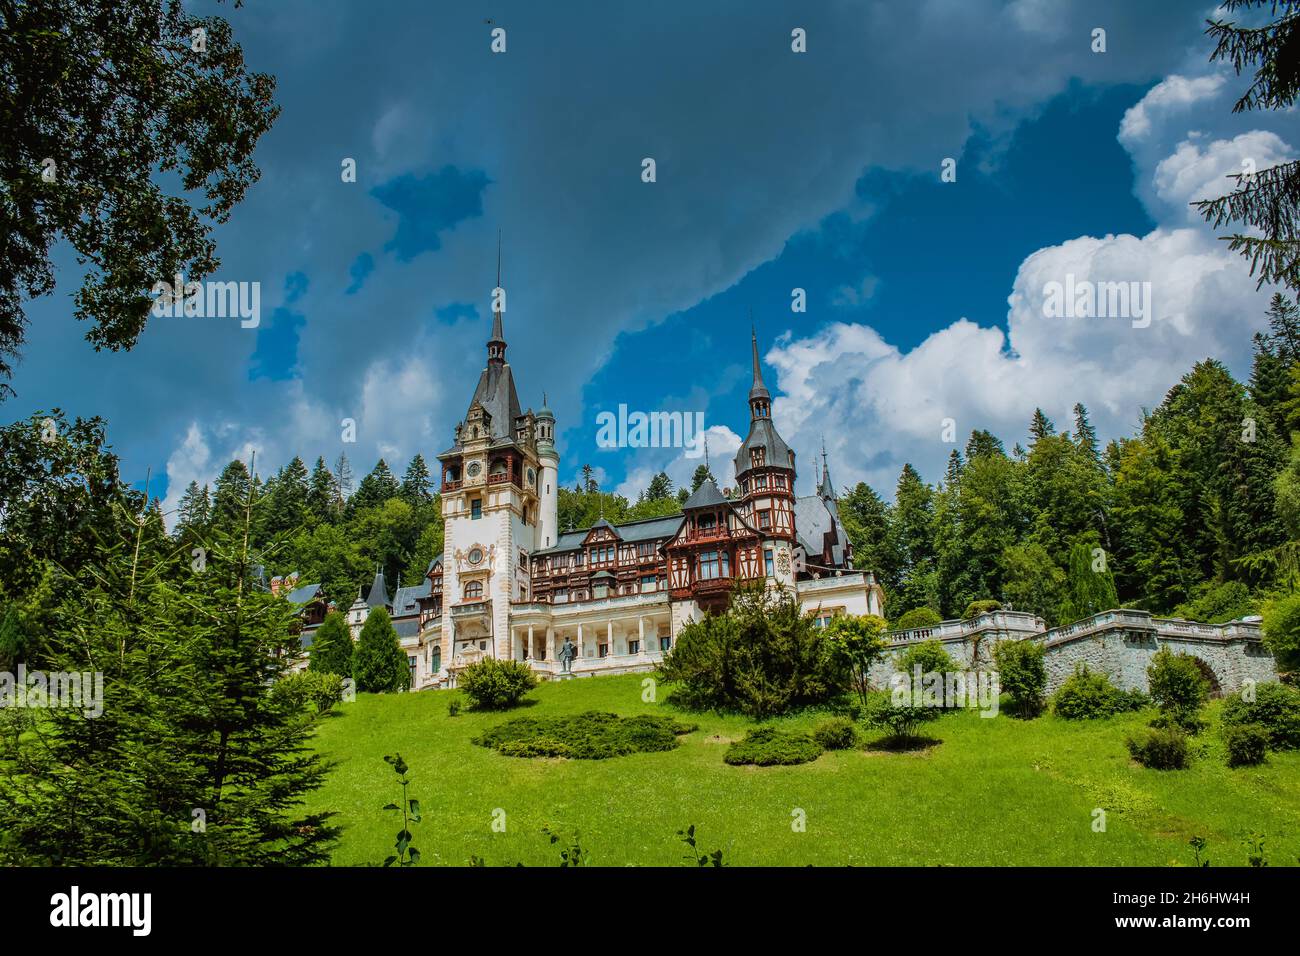 palace Peles from the front in Romania, castle in mountains with sky on background surrounded by trees Stock Photo